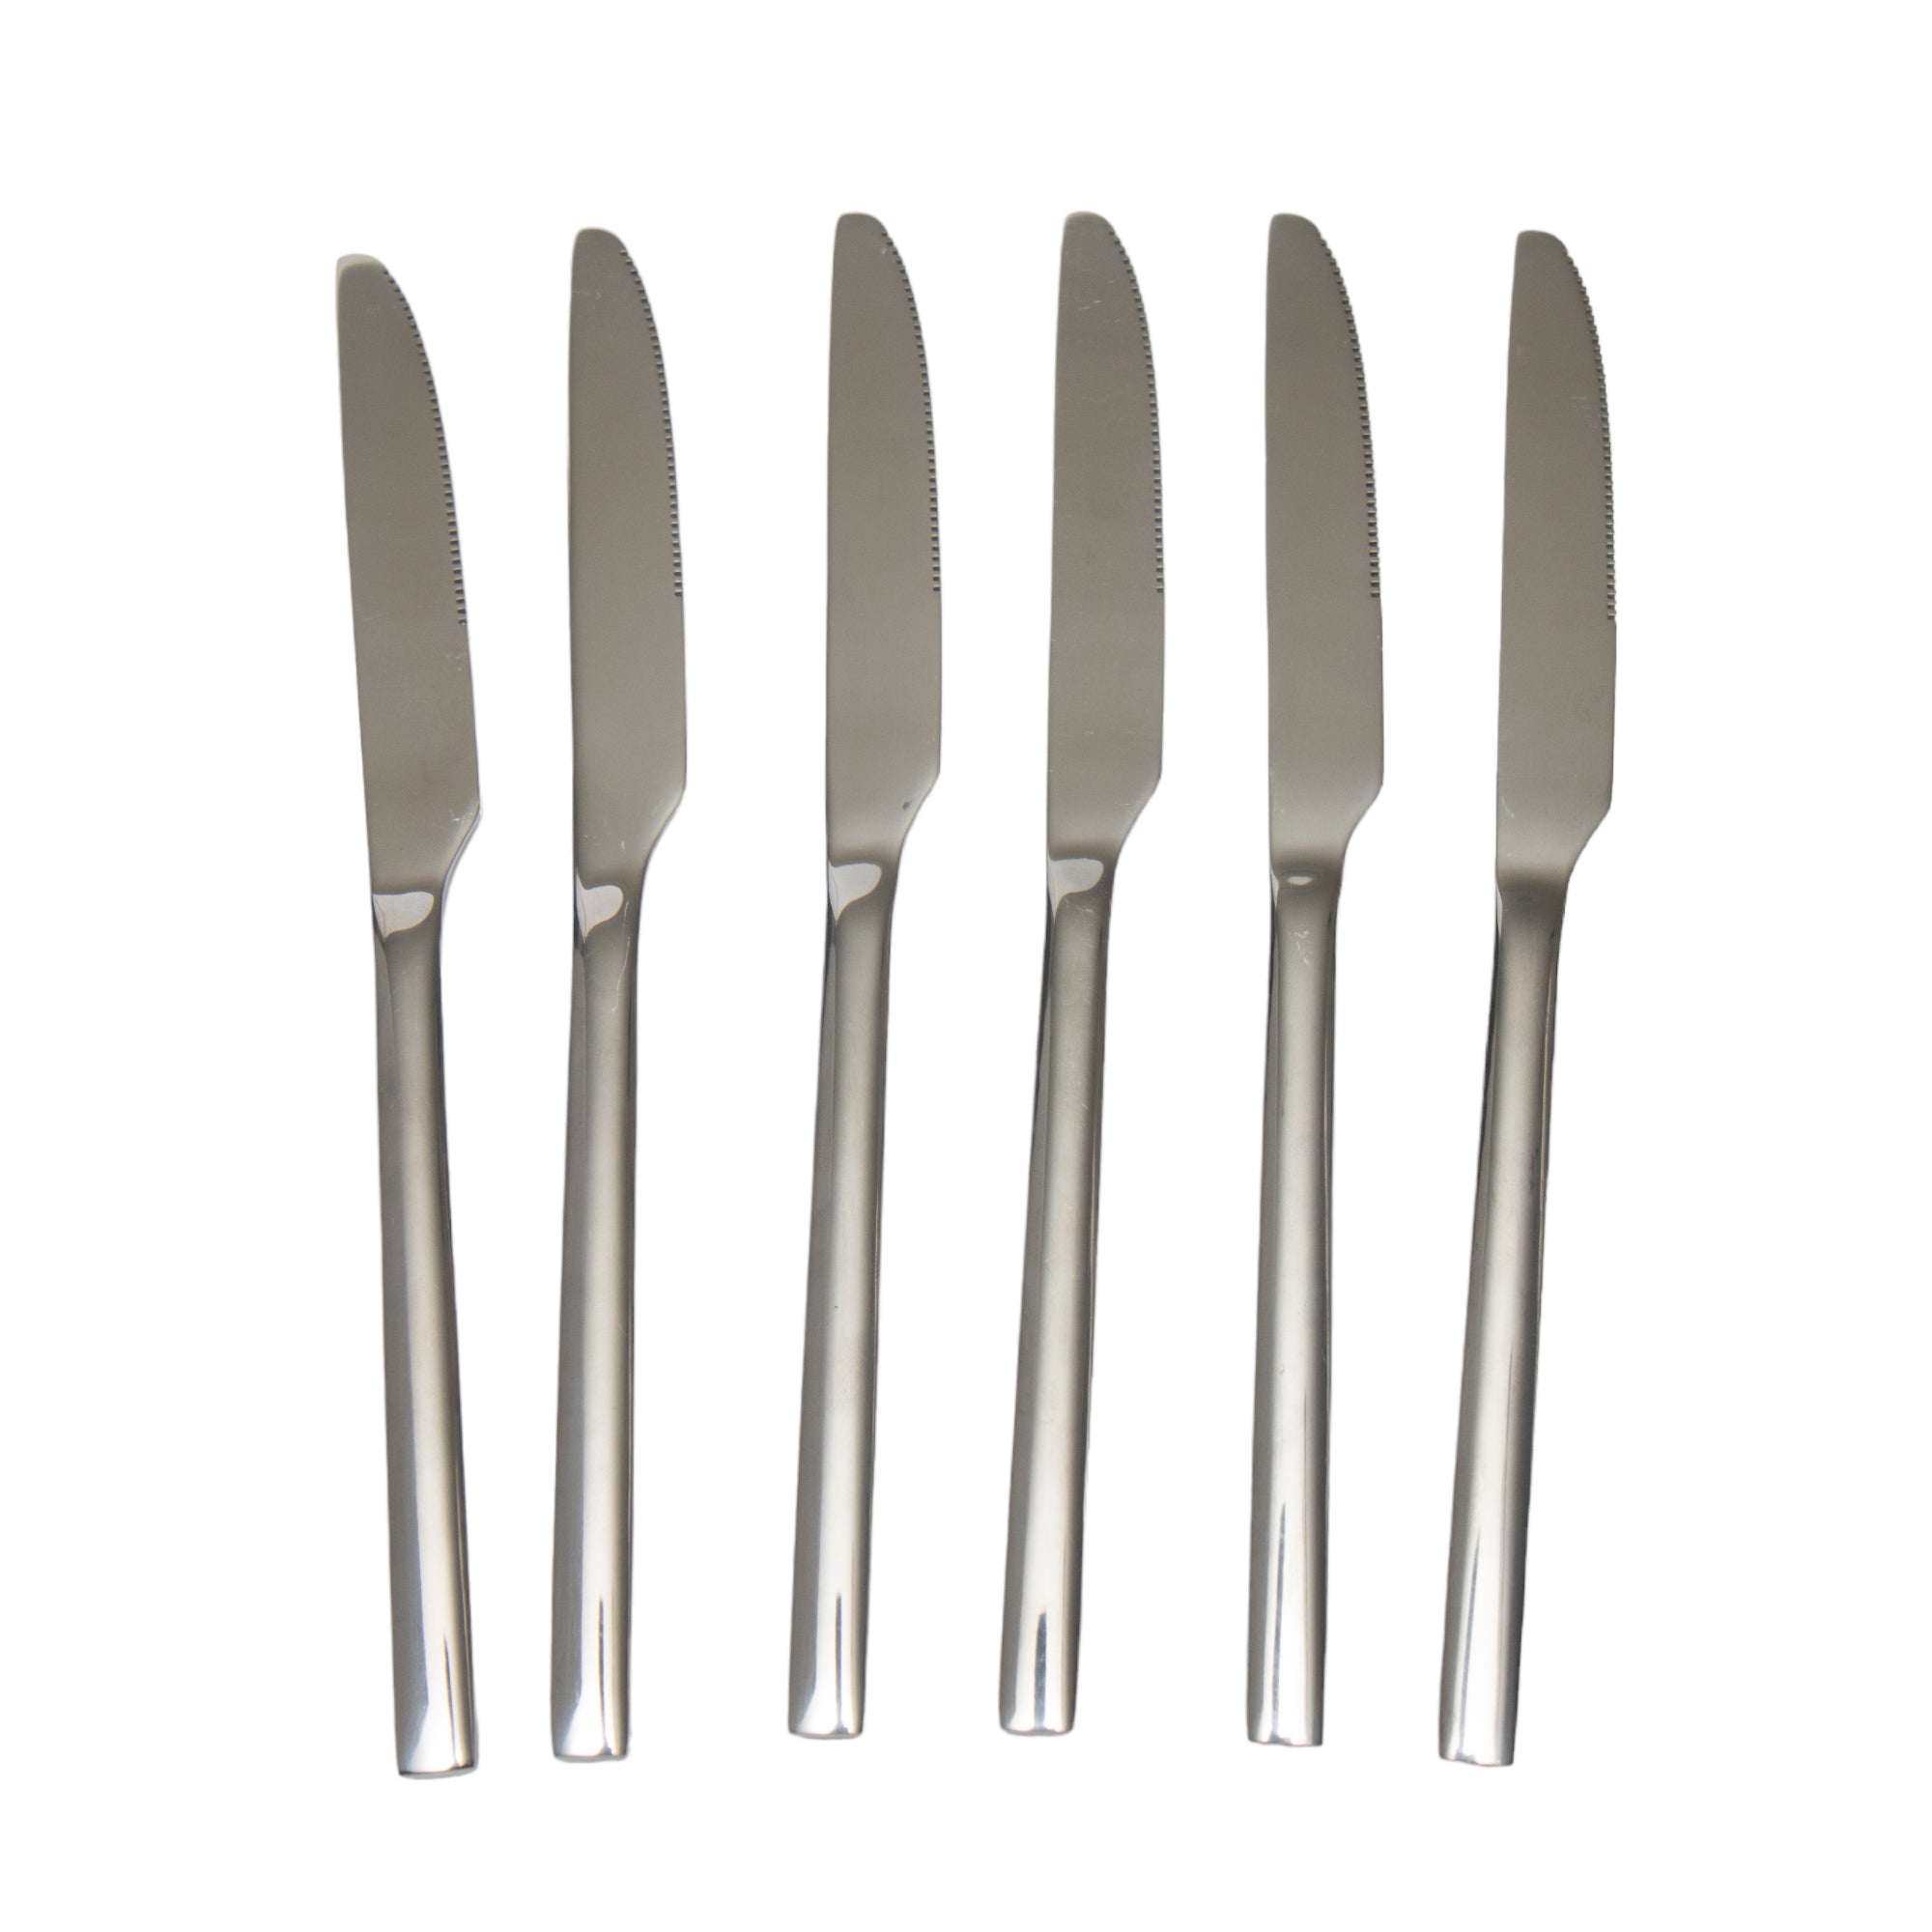 Stainless Steel Knife 6pcs Square Handle CT787